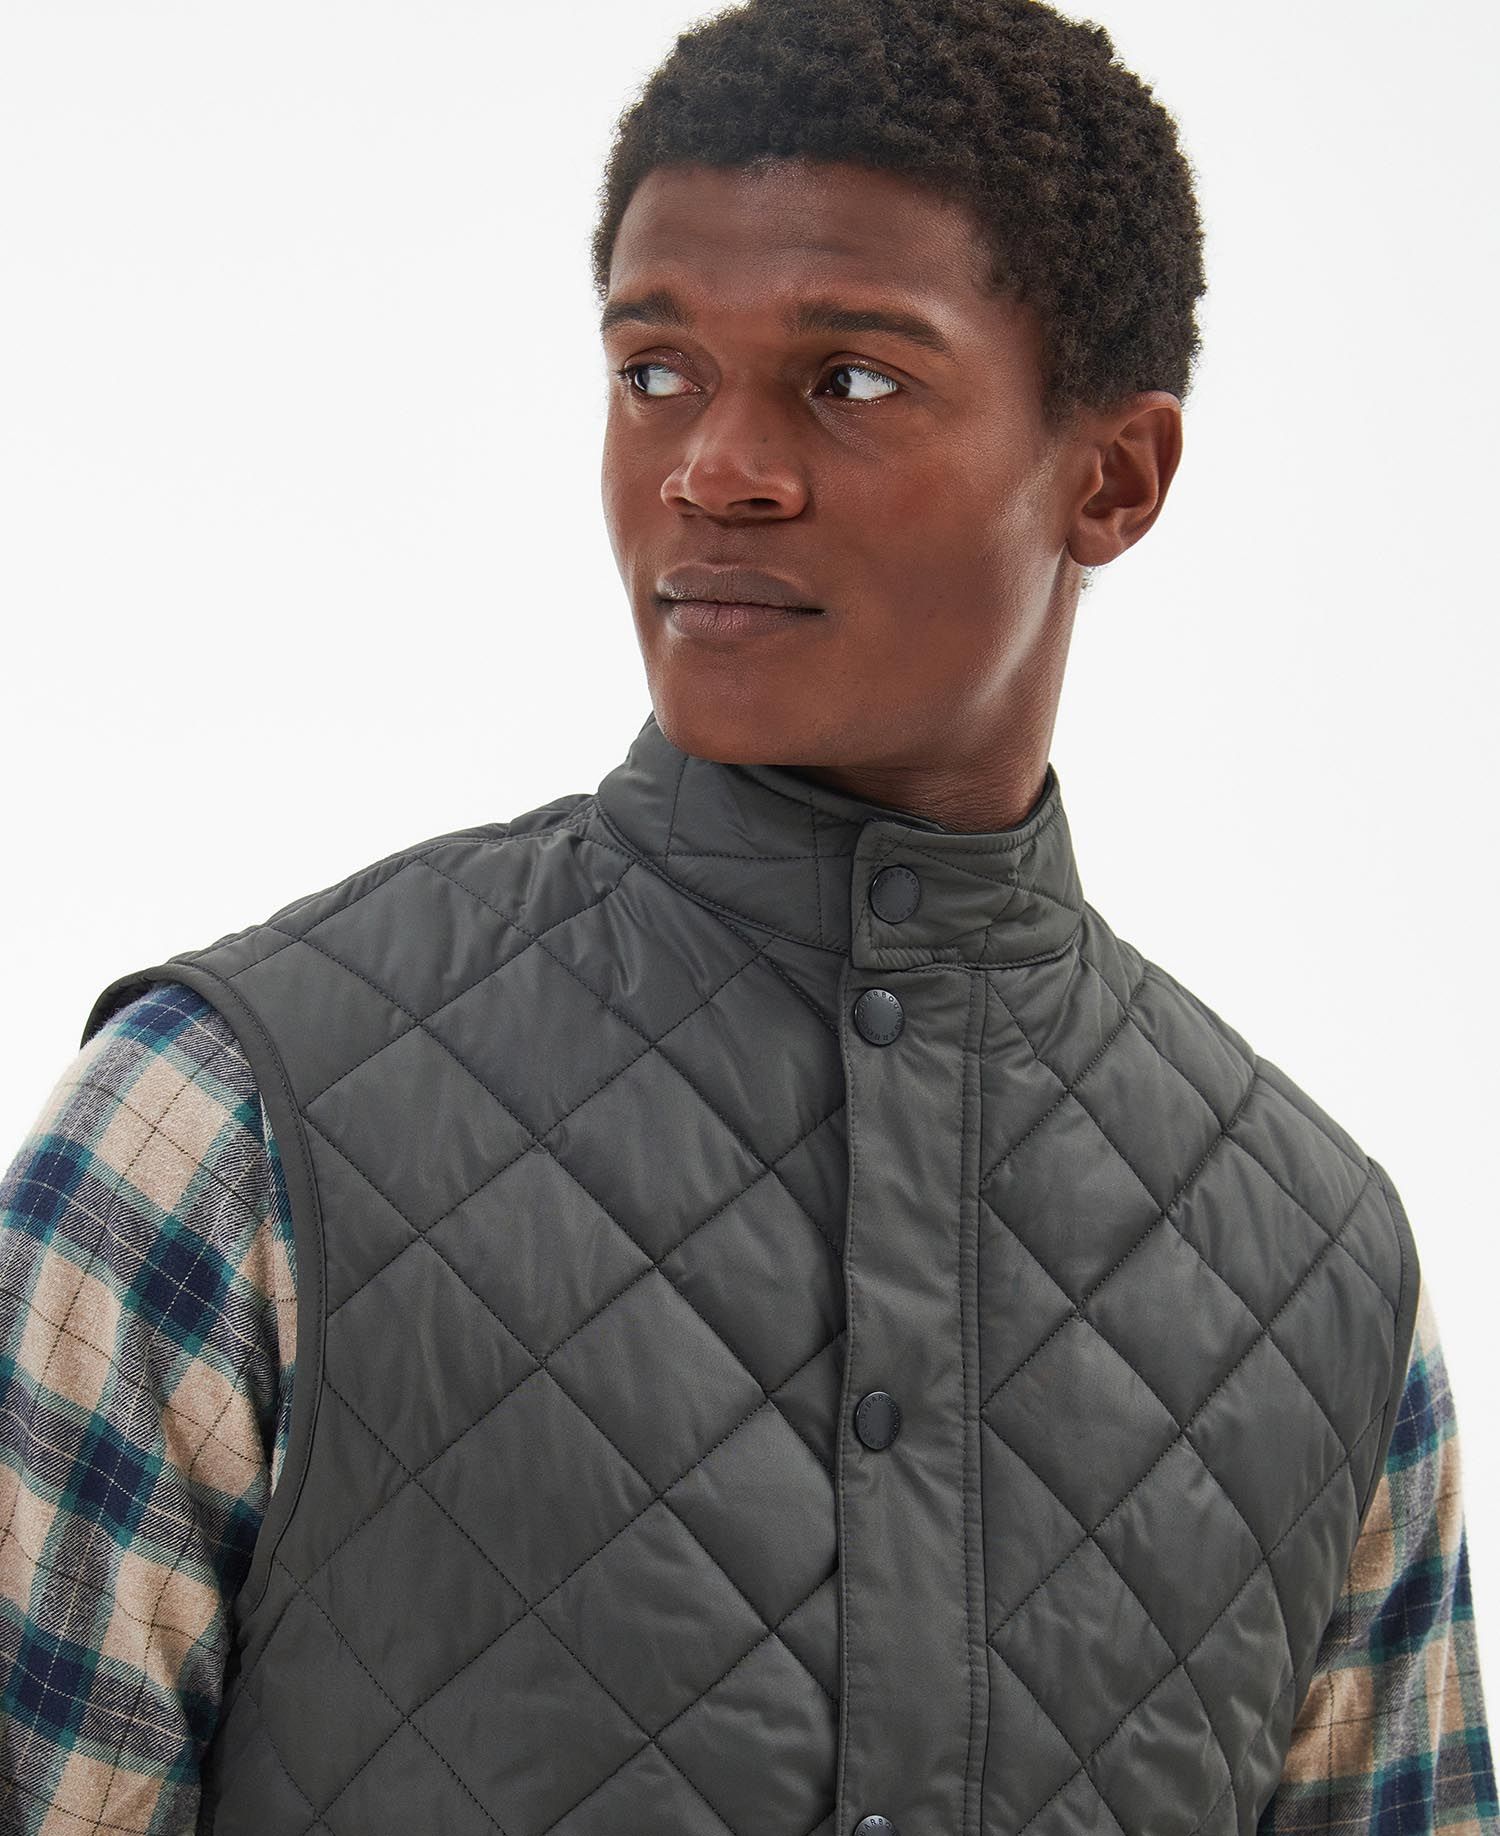 Barbour Lowerdale Quilted Vest - Charcoal